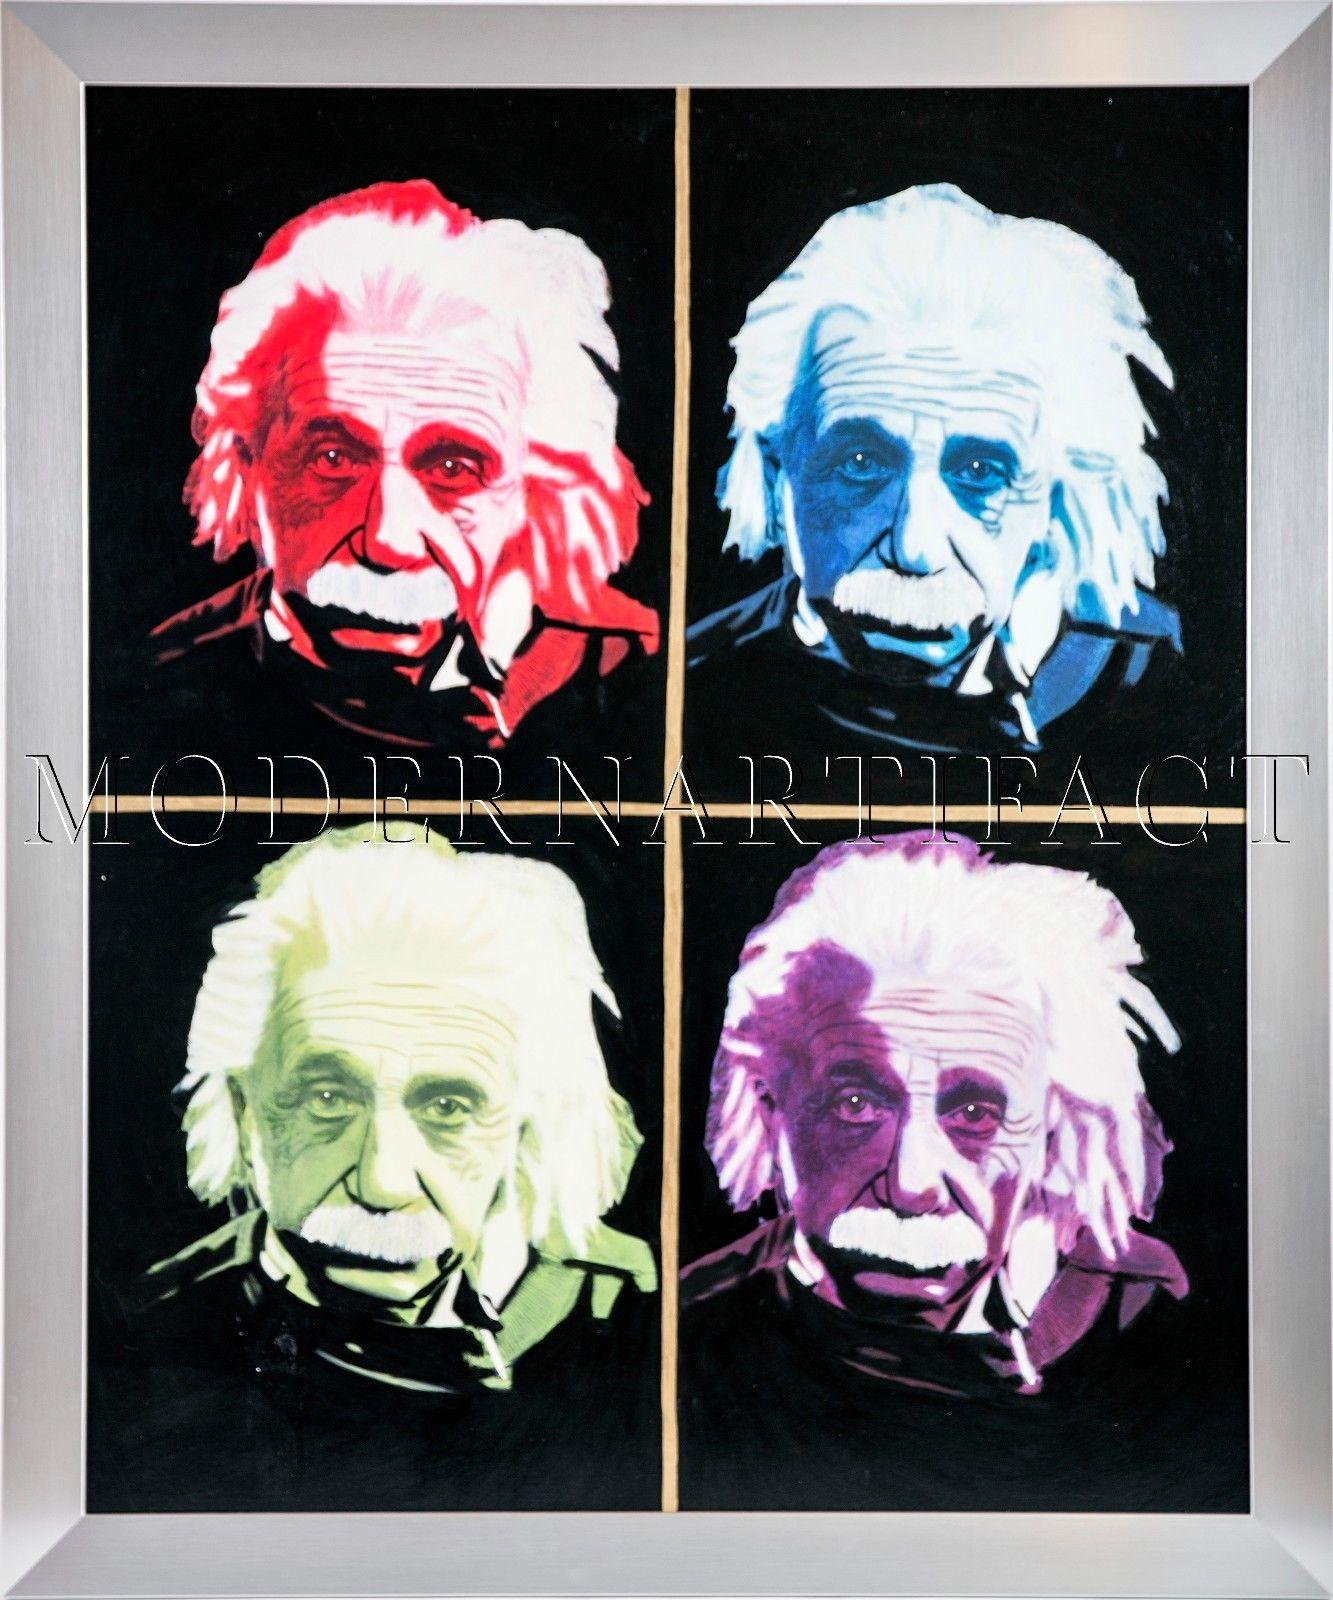 Artist: Steve Kaufman
Title: Einstein Quad
Medium: Original Oil Painting on Screen print Canvas
Size: 48" x 40" 
Size Framed:56" x 48"
Edition size: AP 

Condition: Museum quality condition.  For framing we spared no expense to give our buyers the